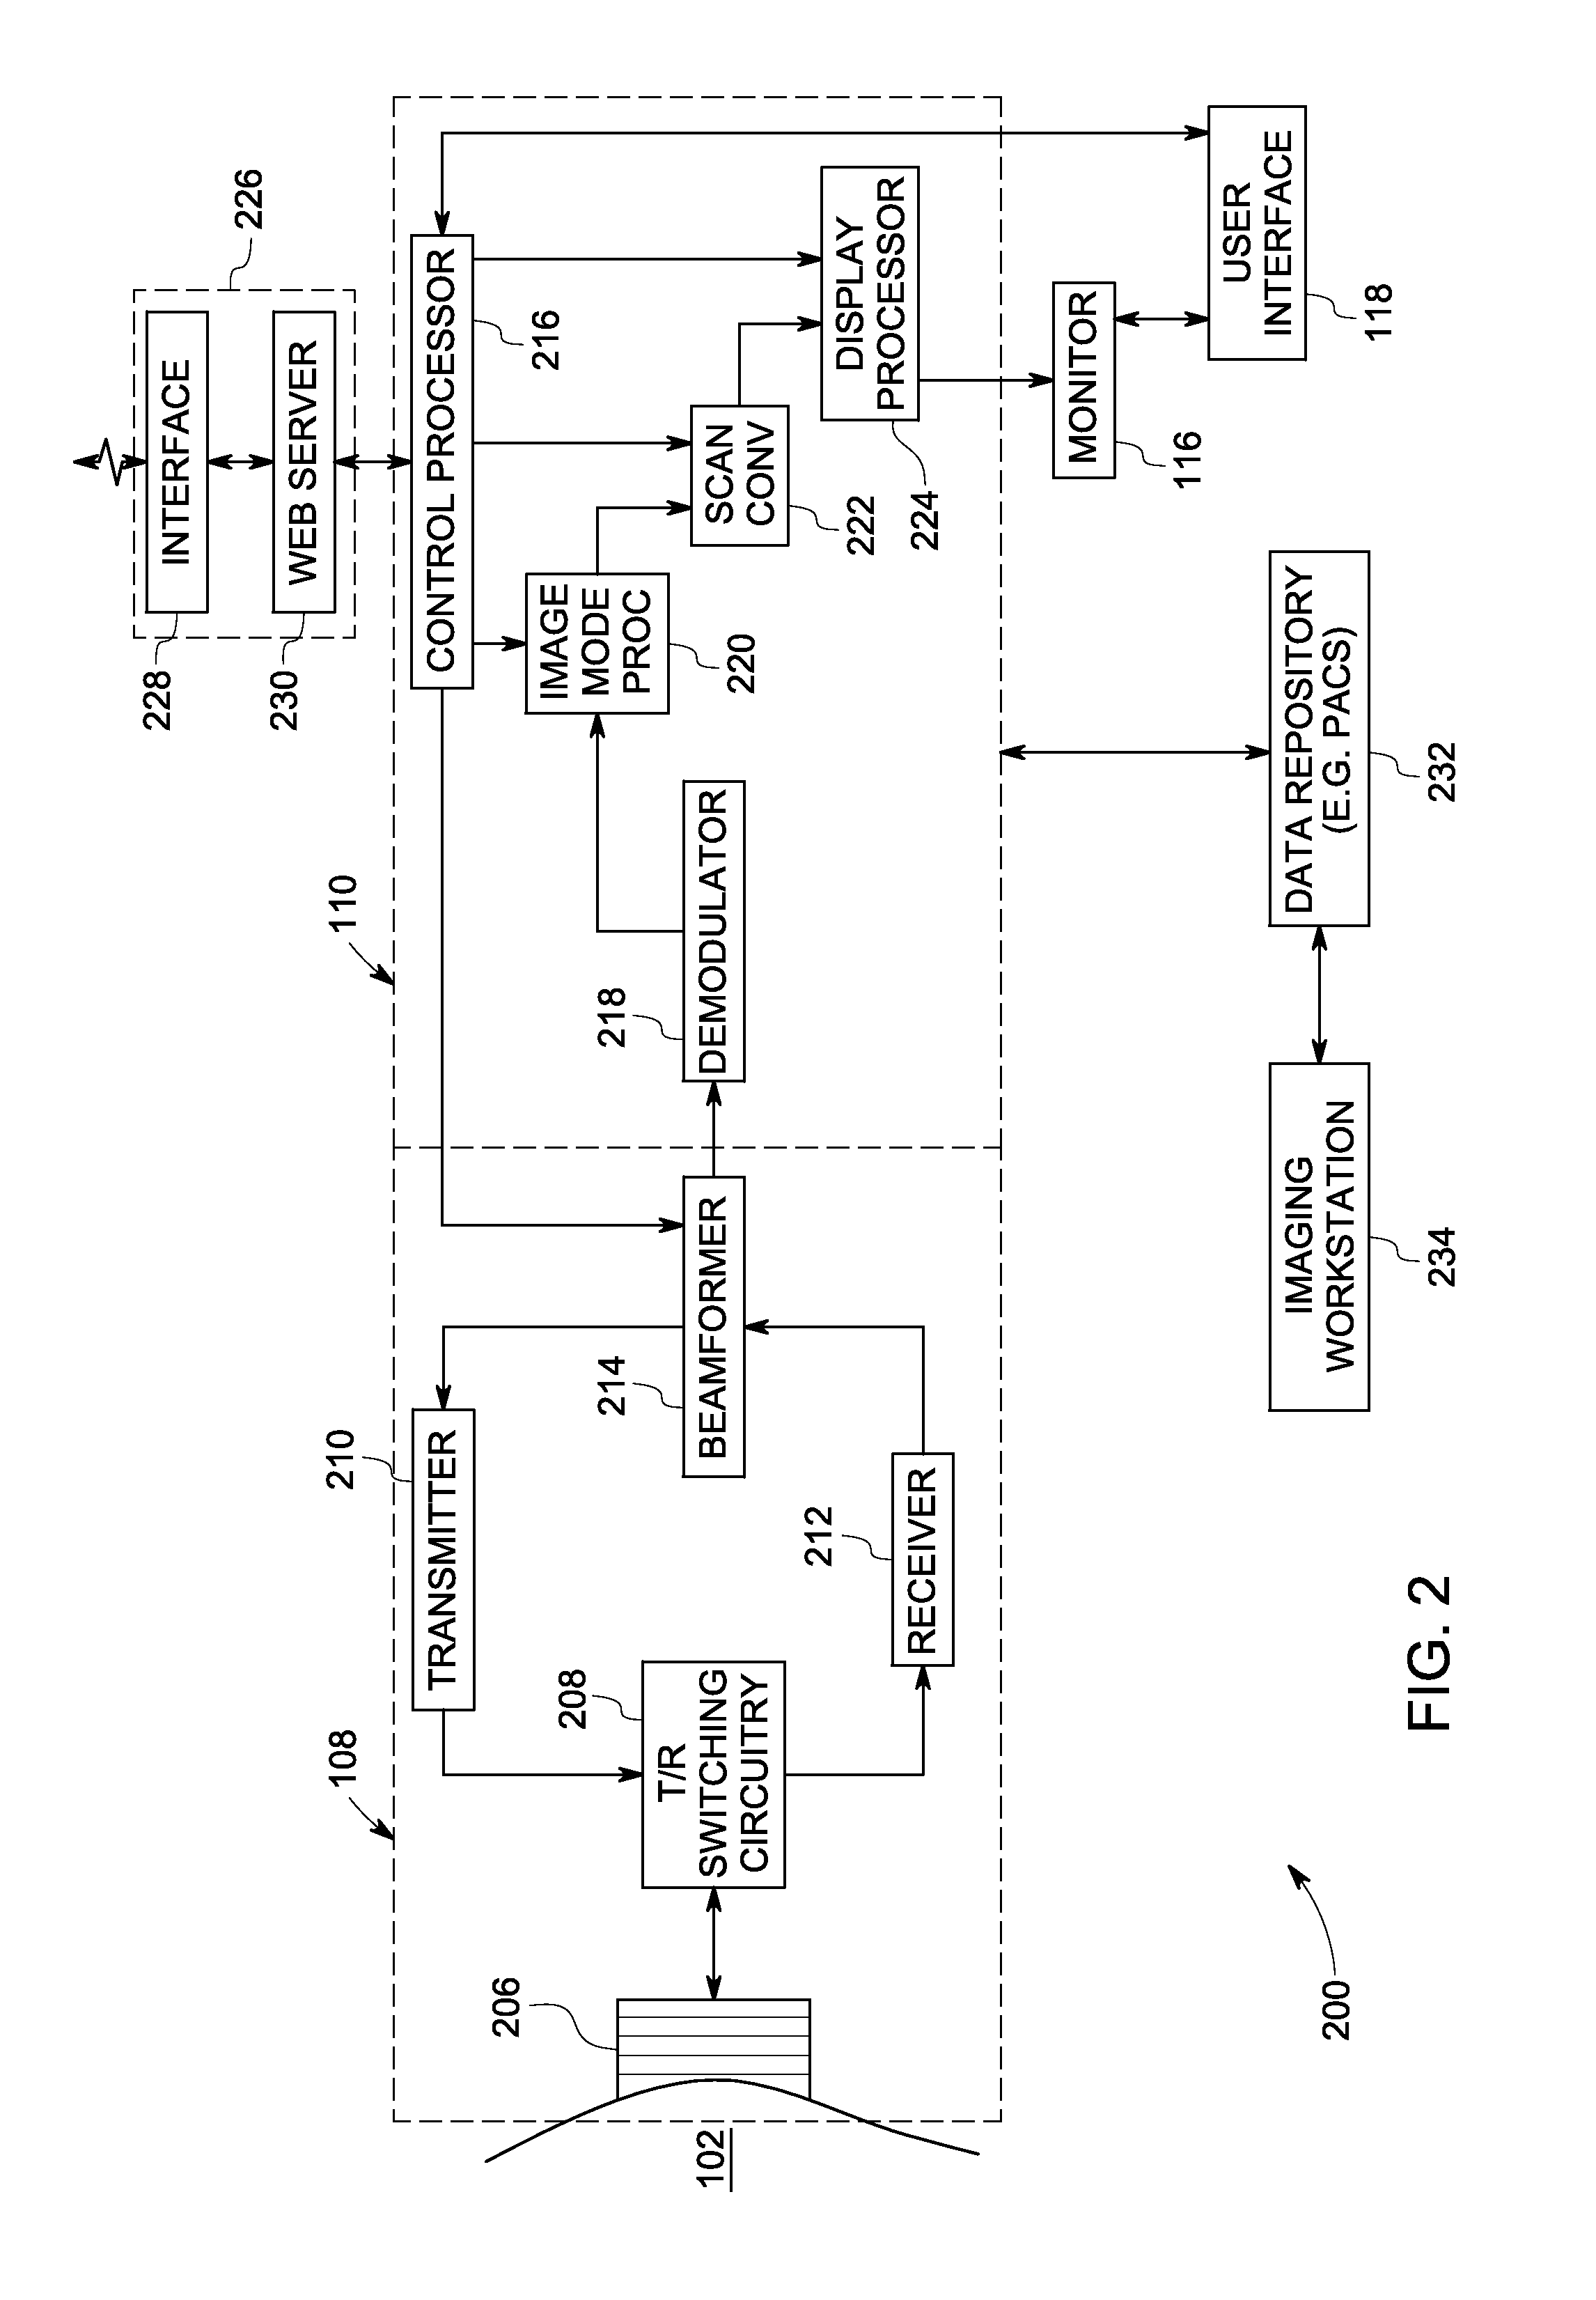 Method and system for ultrasound based automated detection, quantification and tracking of pathologies